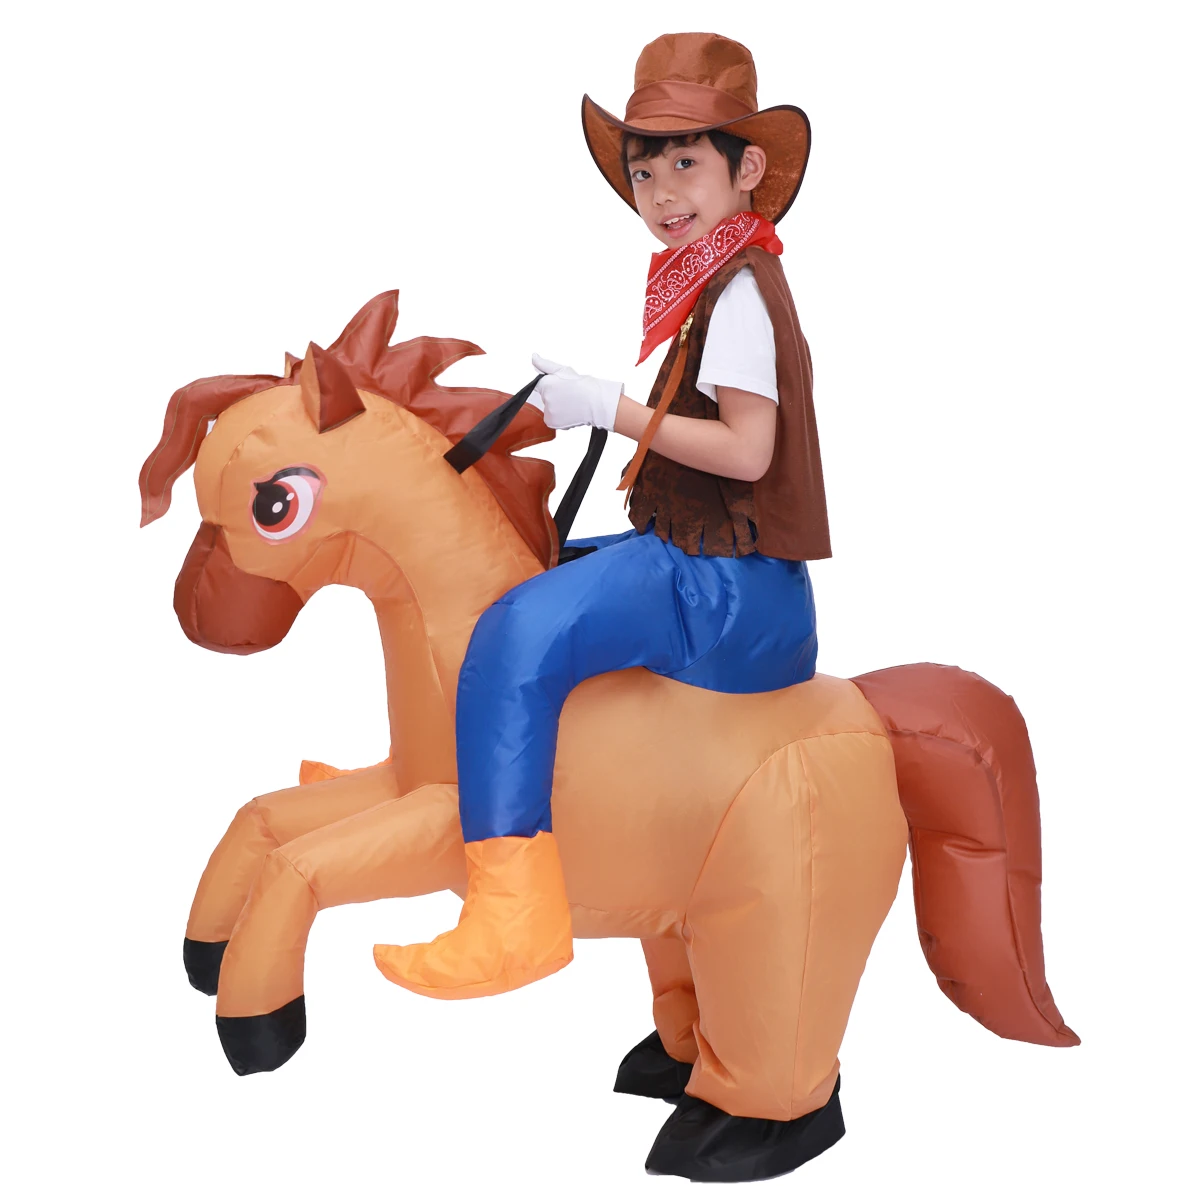 Kids Child Inflatable Horse Costume Cosplay Girls Boys Cowboy Ride Horse Funny Halloween Purim Party Inflated Garment Disfraces wonder garden kid children profession police cosplay halloween purim costume boys stage suit